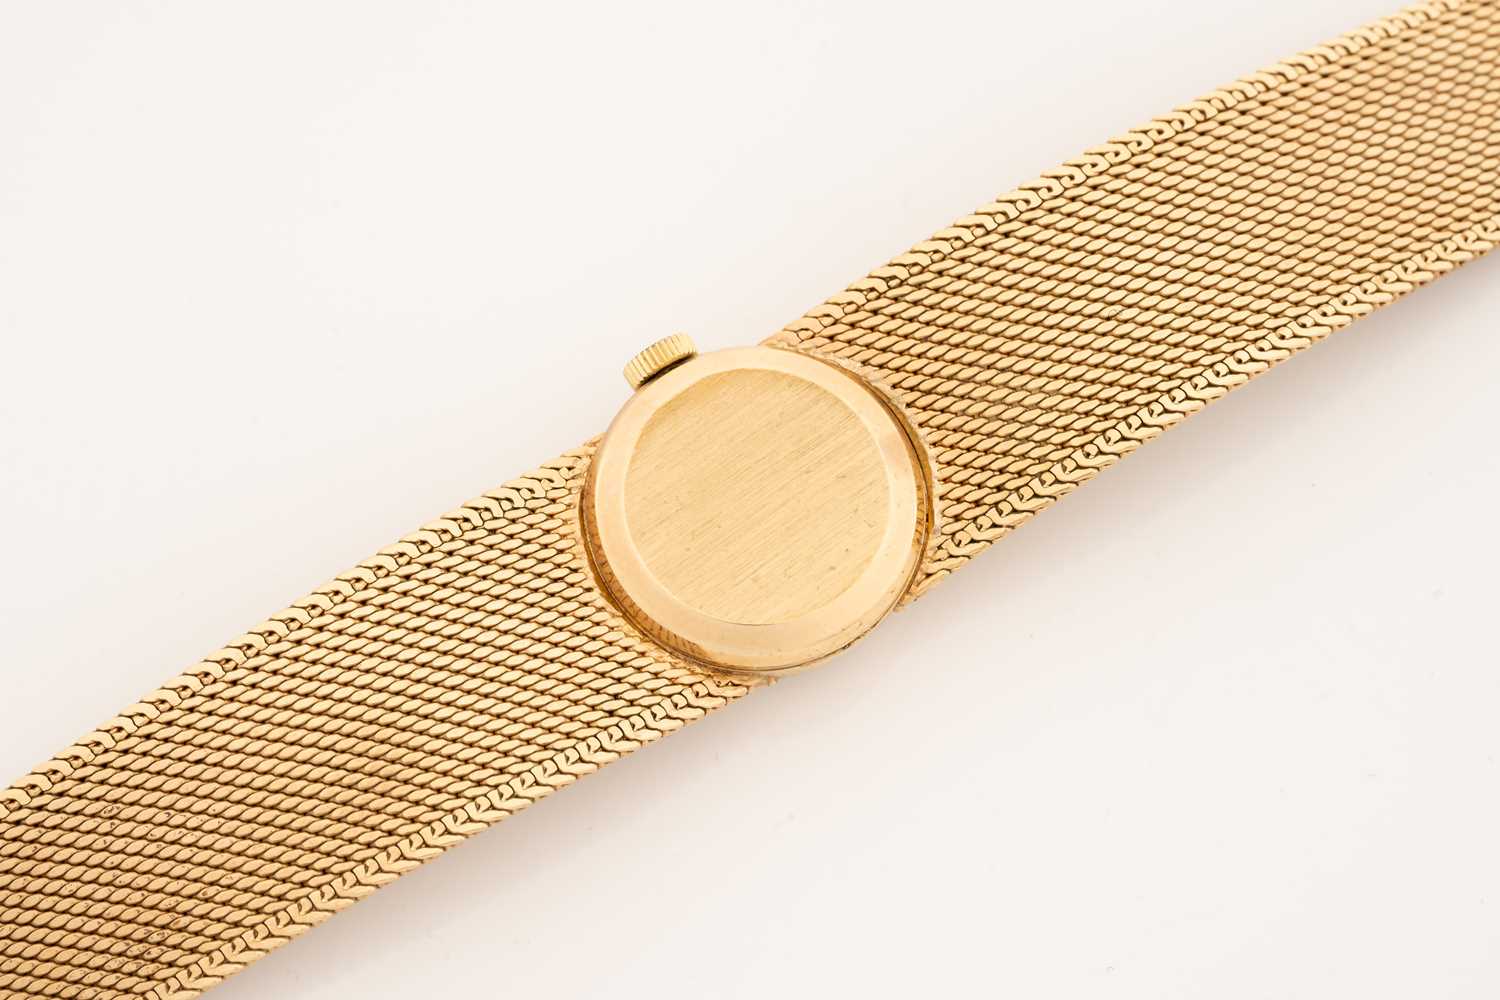 An Omega lady's wristwatch, featuring a swiss made hand-wound movement in a yellow metal case - Image 3 of 7